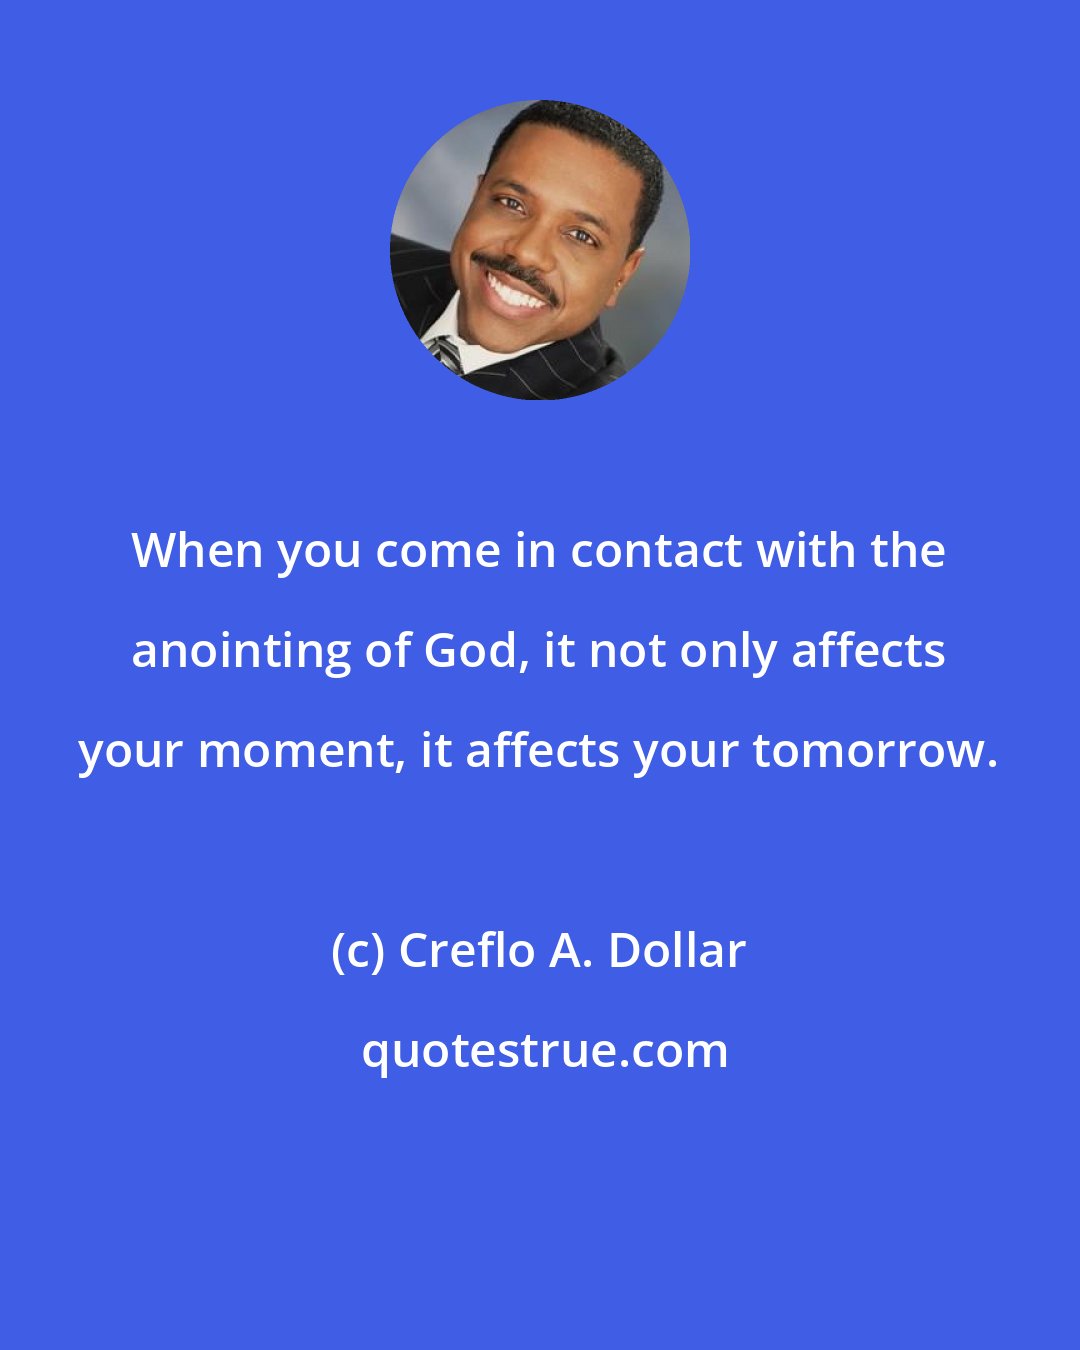 Creflo A. Dollar: When you come in contact with the anointing of God, it not only affects your moment, it affects your tomorrow.